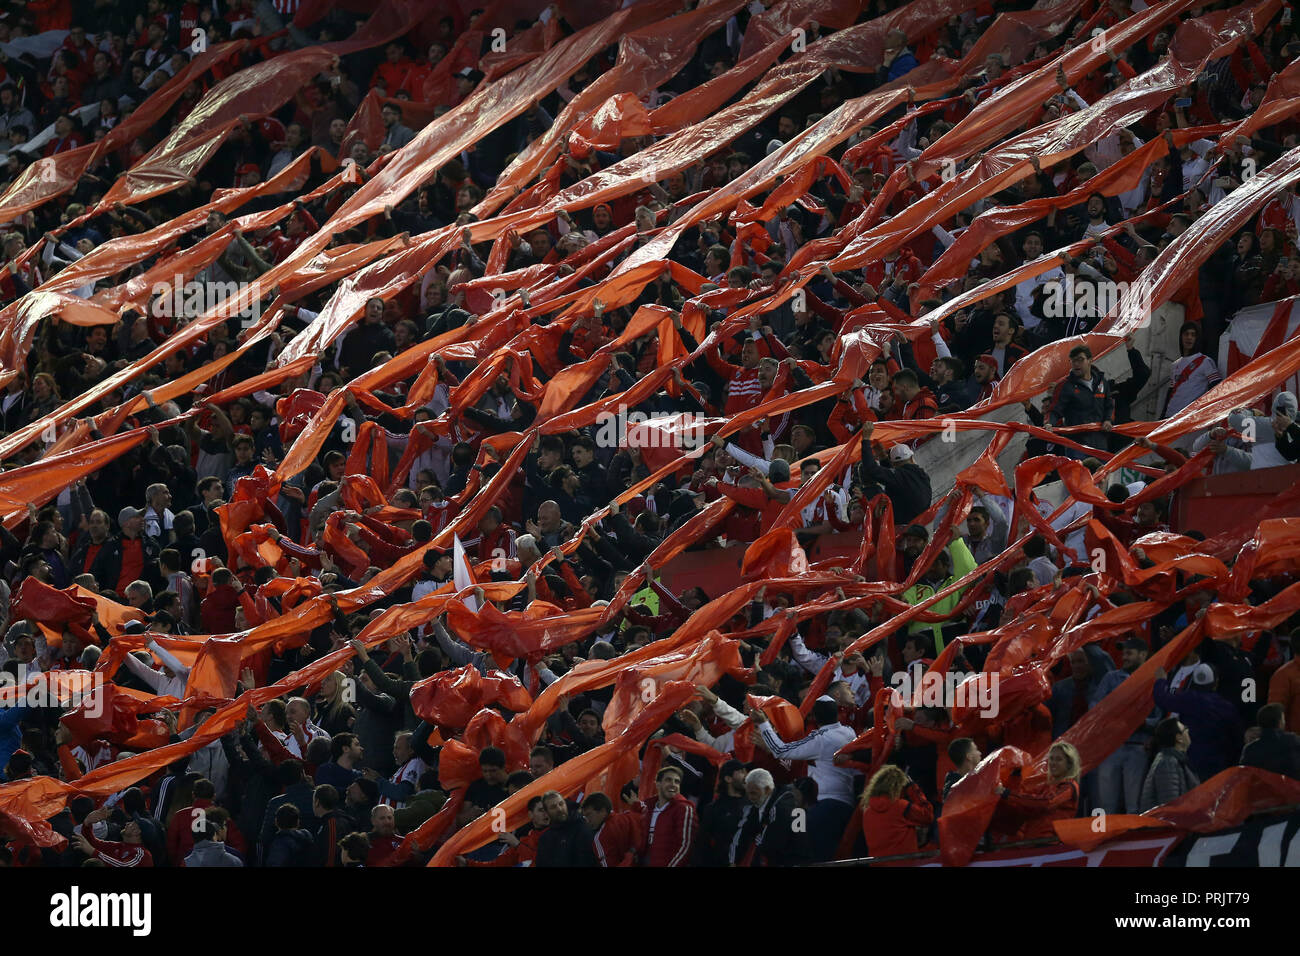 River plate fans celebrating the victory against Independiente Stock Photo